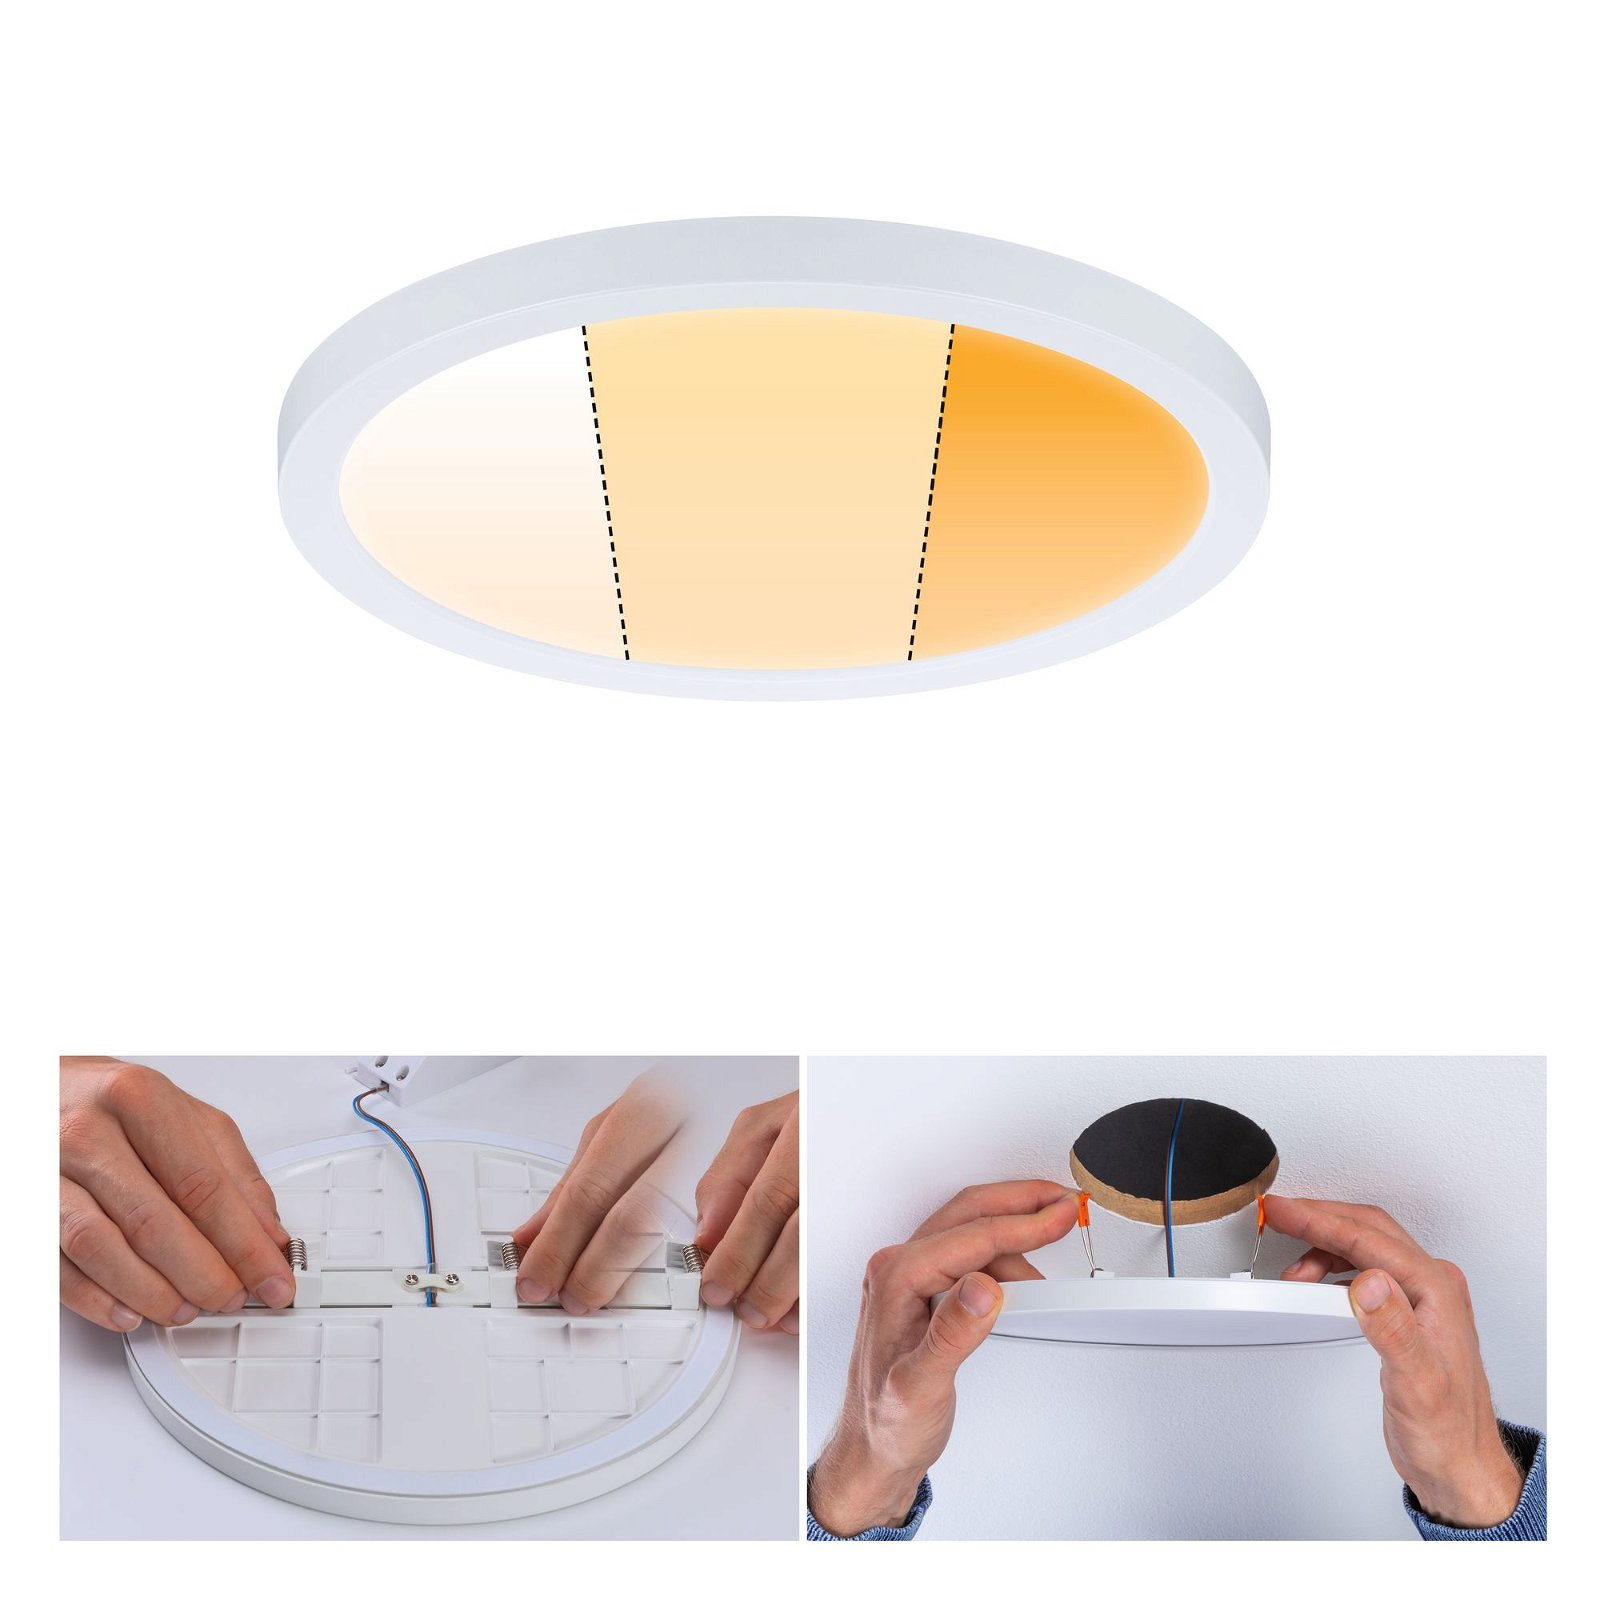 VariFit LED Recessed panel Dim to Warm Areo IP44 round 175mm 13W 1200lm 3 Step Dim to warm Matt white dimmable